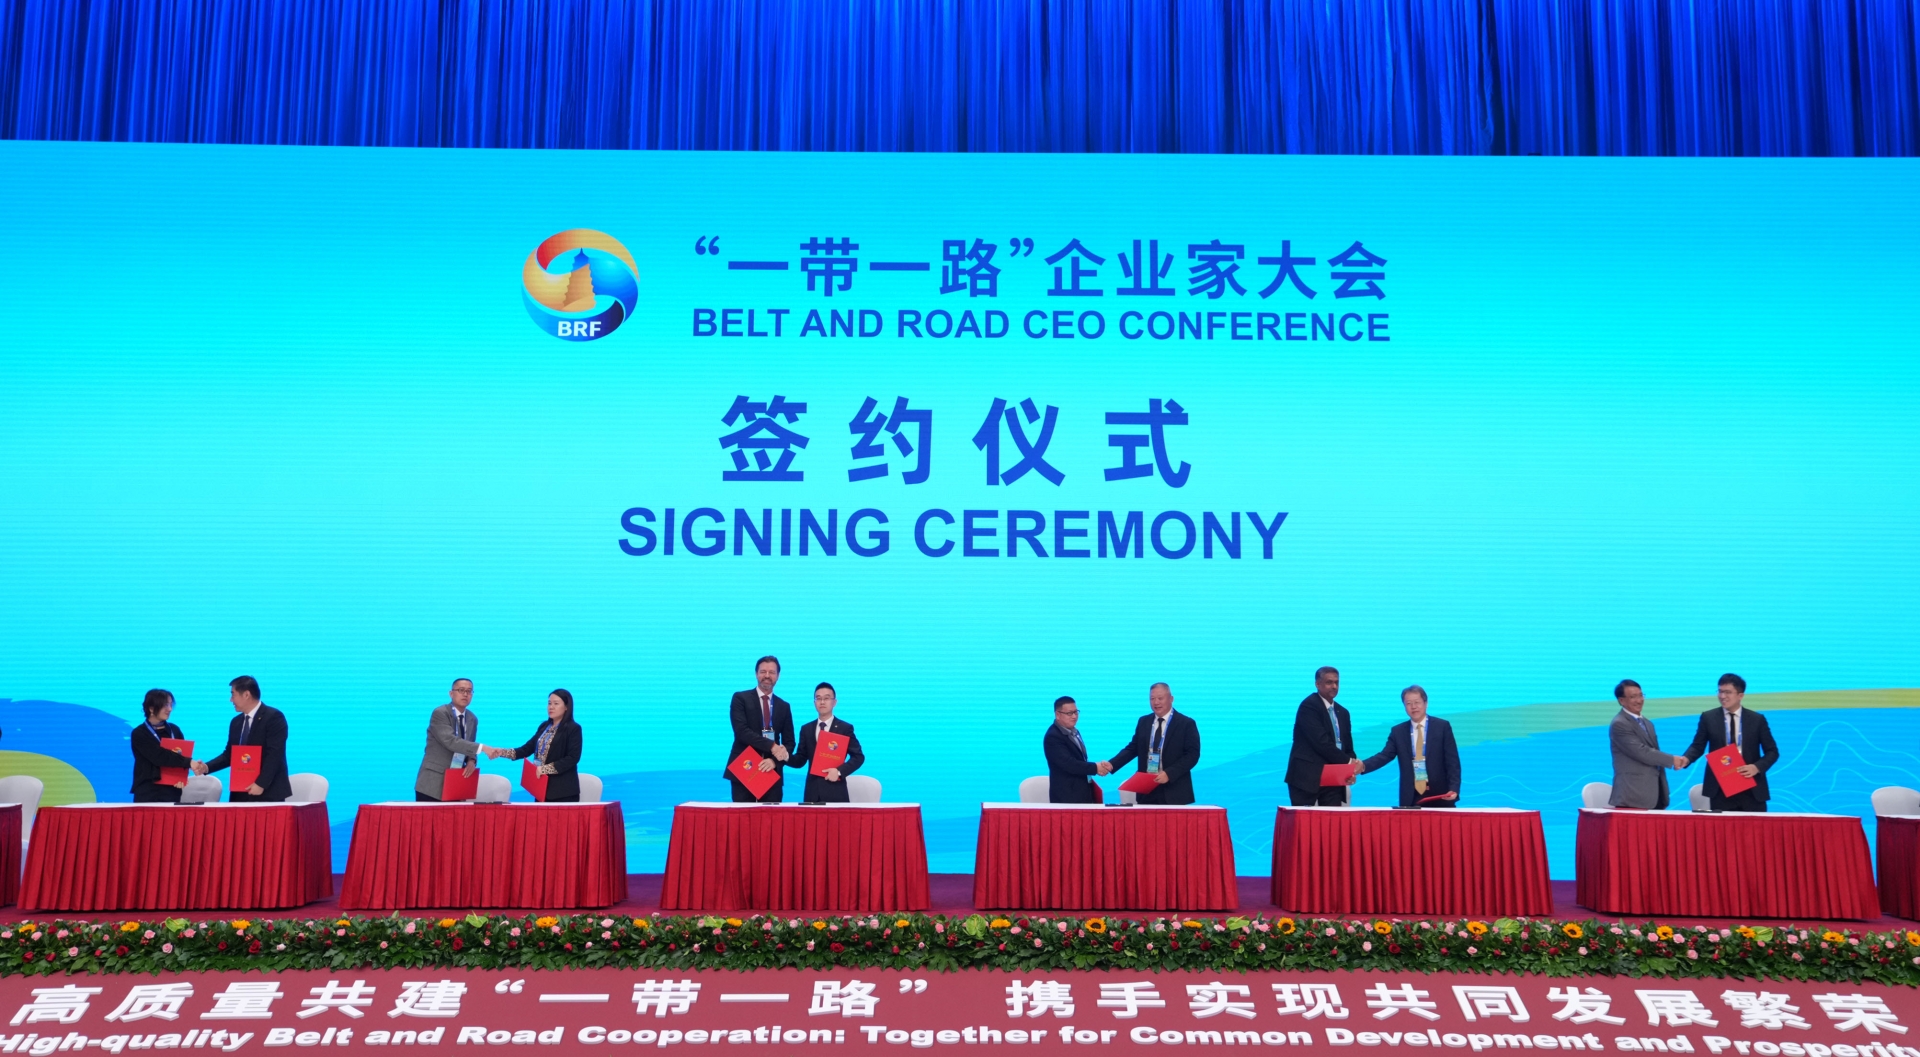 3rd Belt and Road Forum for Int'l Cooperation